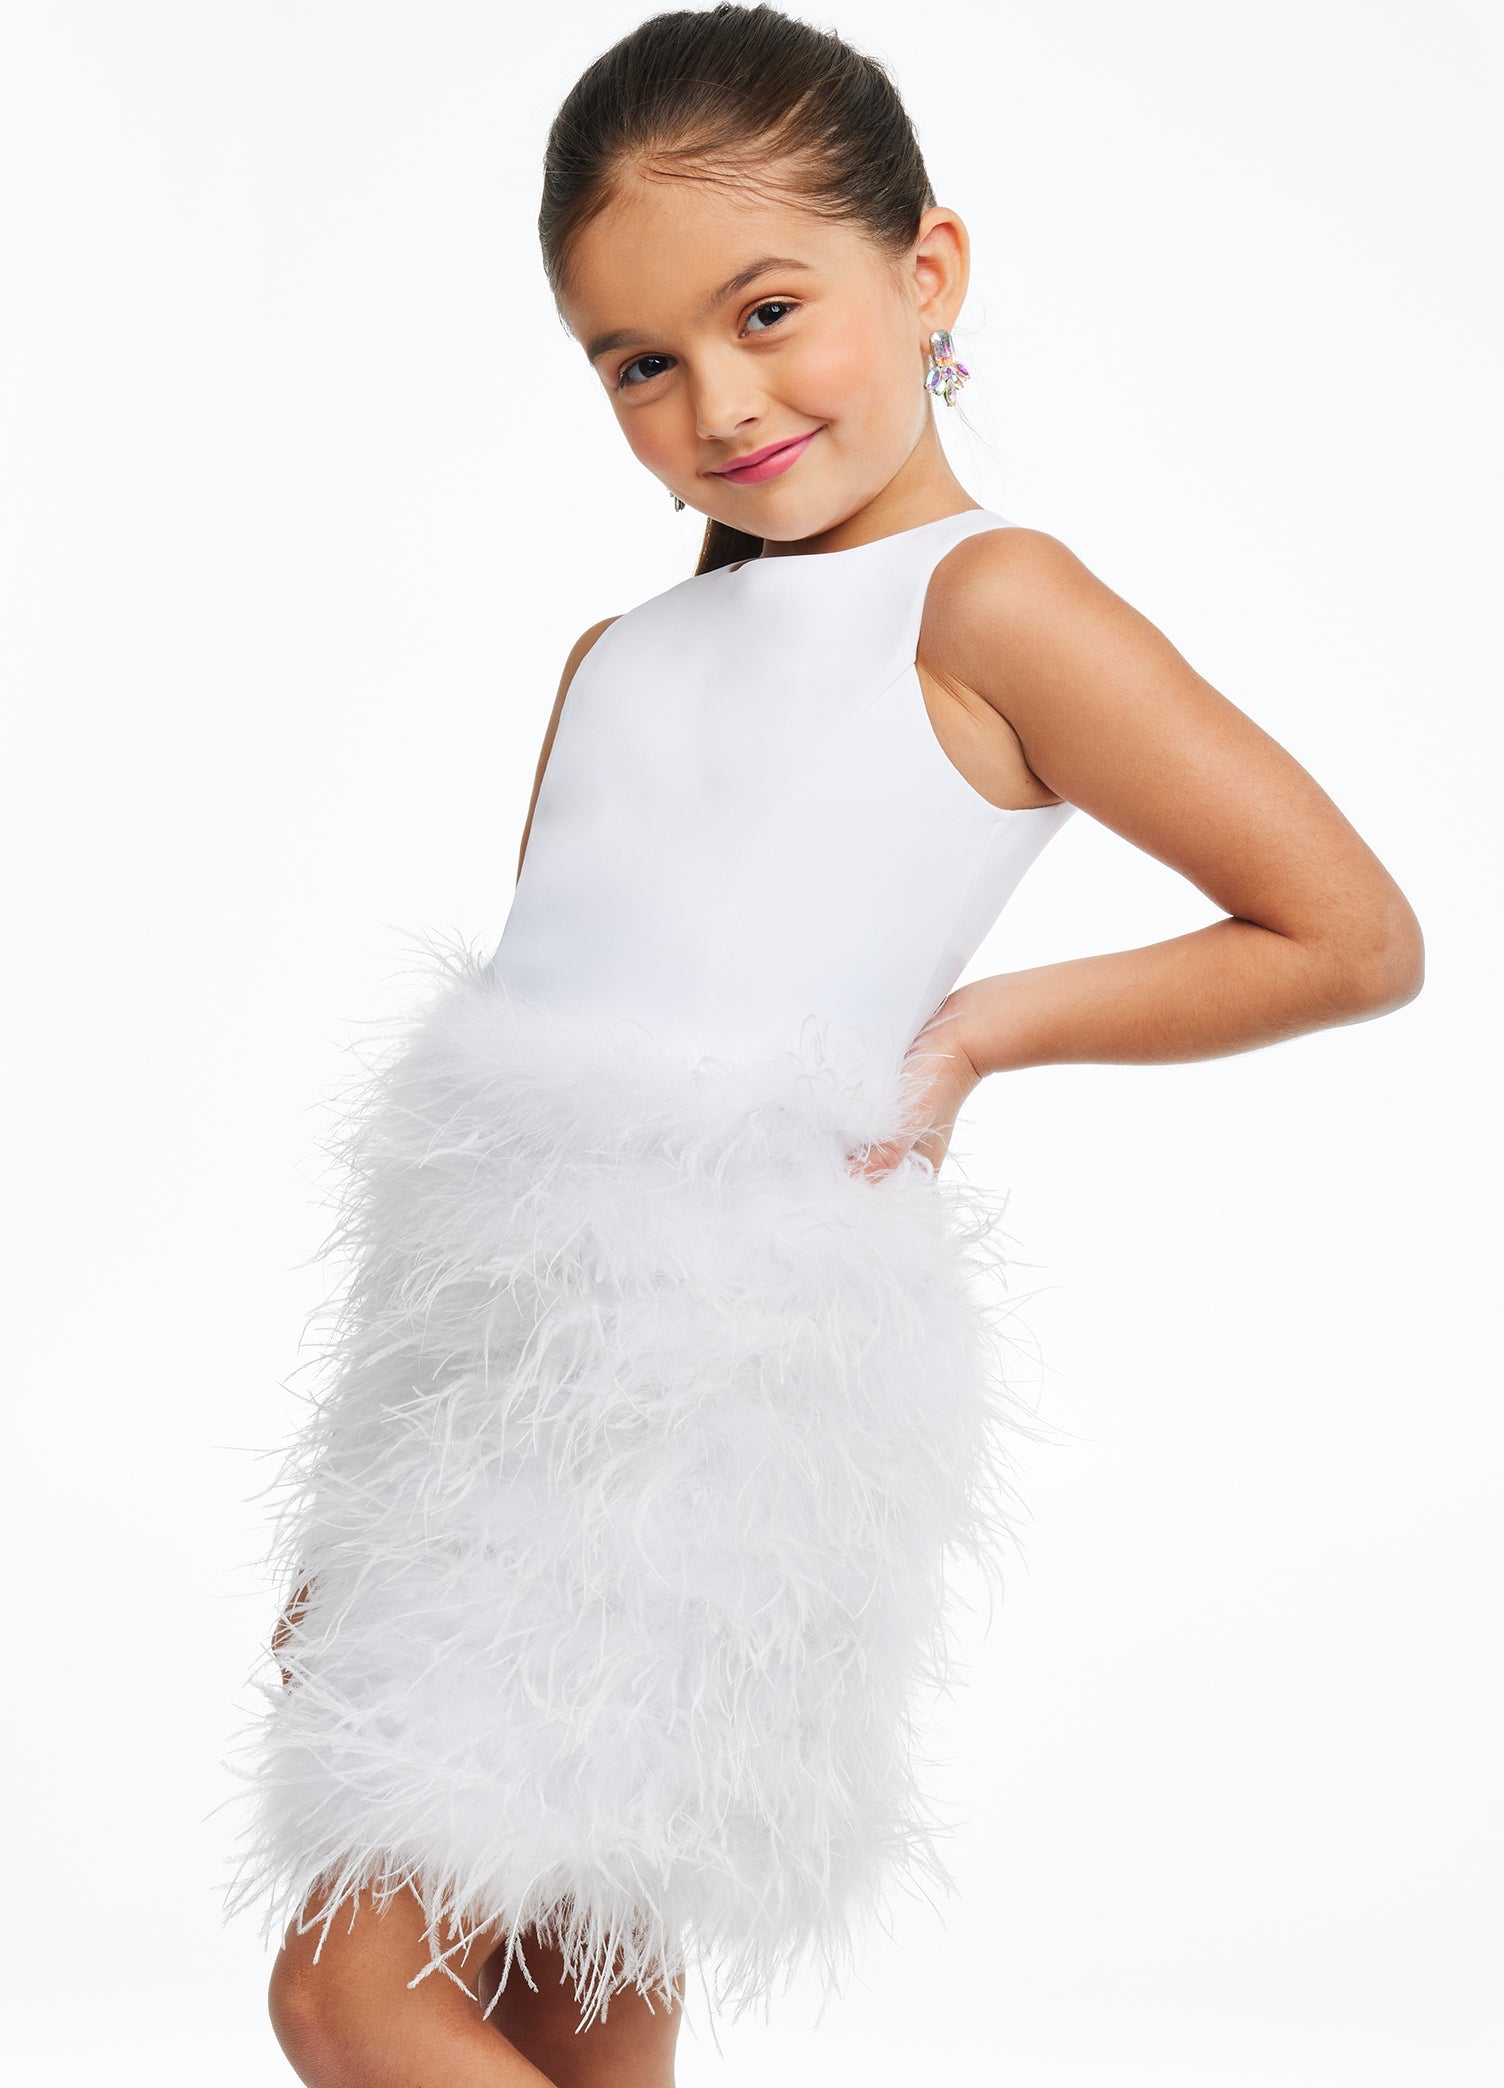 Ashley Lauren Kids 8132 Short Feather skirt cocktail girls Pageant Dress Cutout back Fabulous in feathers! This kids cocktail dress features a scuba bustier giving way to a full feather skirt and open back. Crew Neckline Open Back Scuba Feathers Available Sizes: 2-16 Available Colors: Turquoise, Hot Pink, White